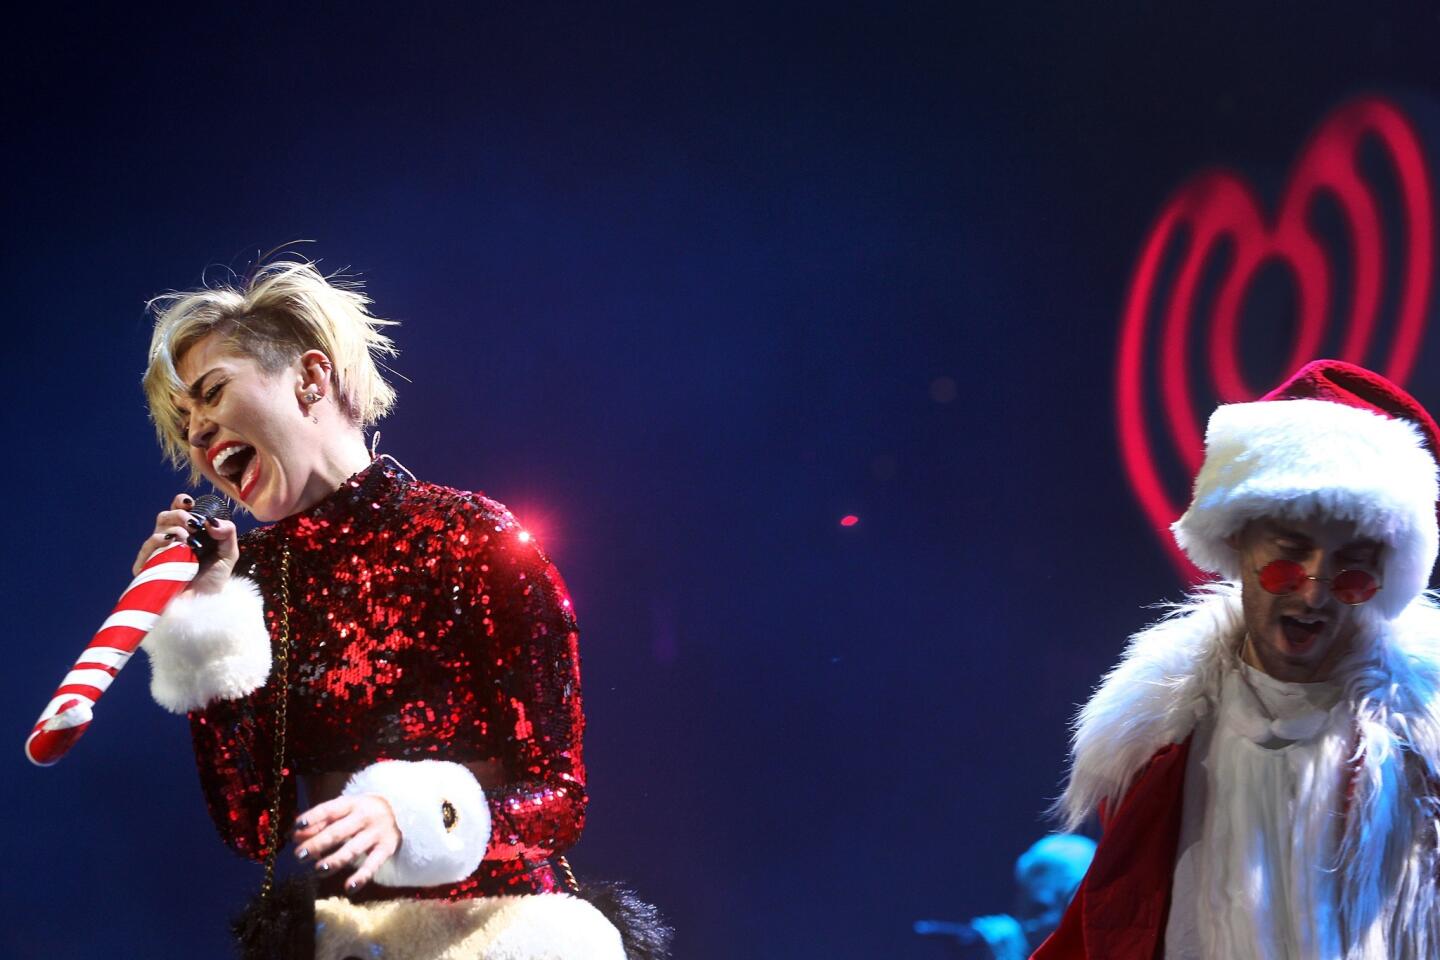 Miley Cyrus performs at KIIS-FM's Jingle Ball 2013 at Staples Center in Los Angeles.